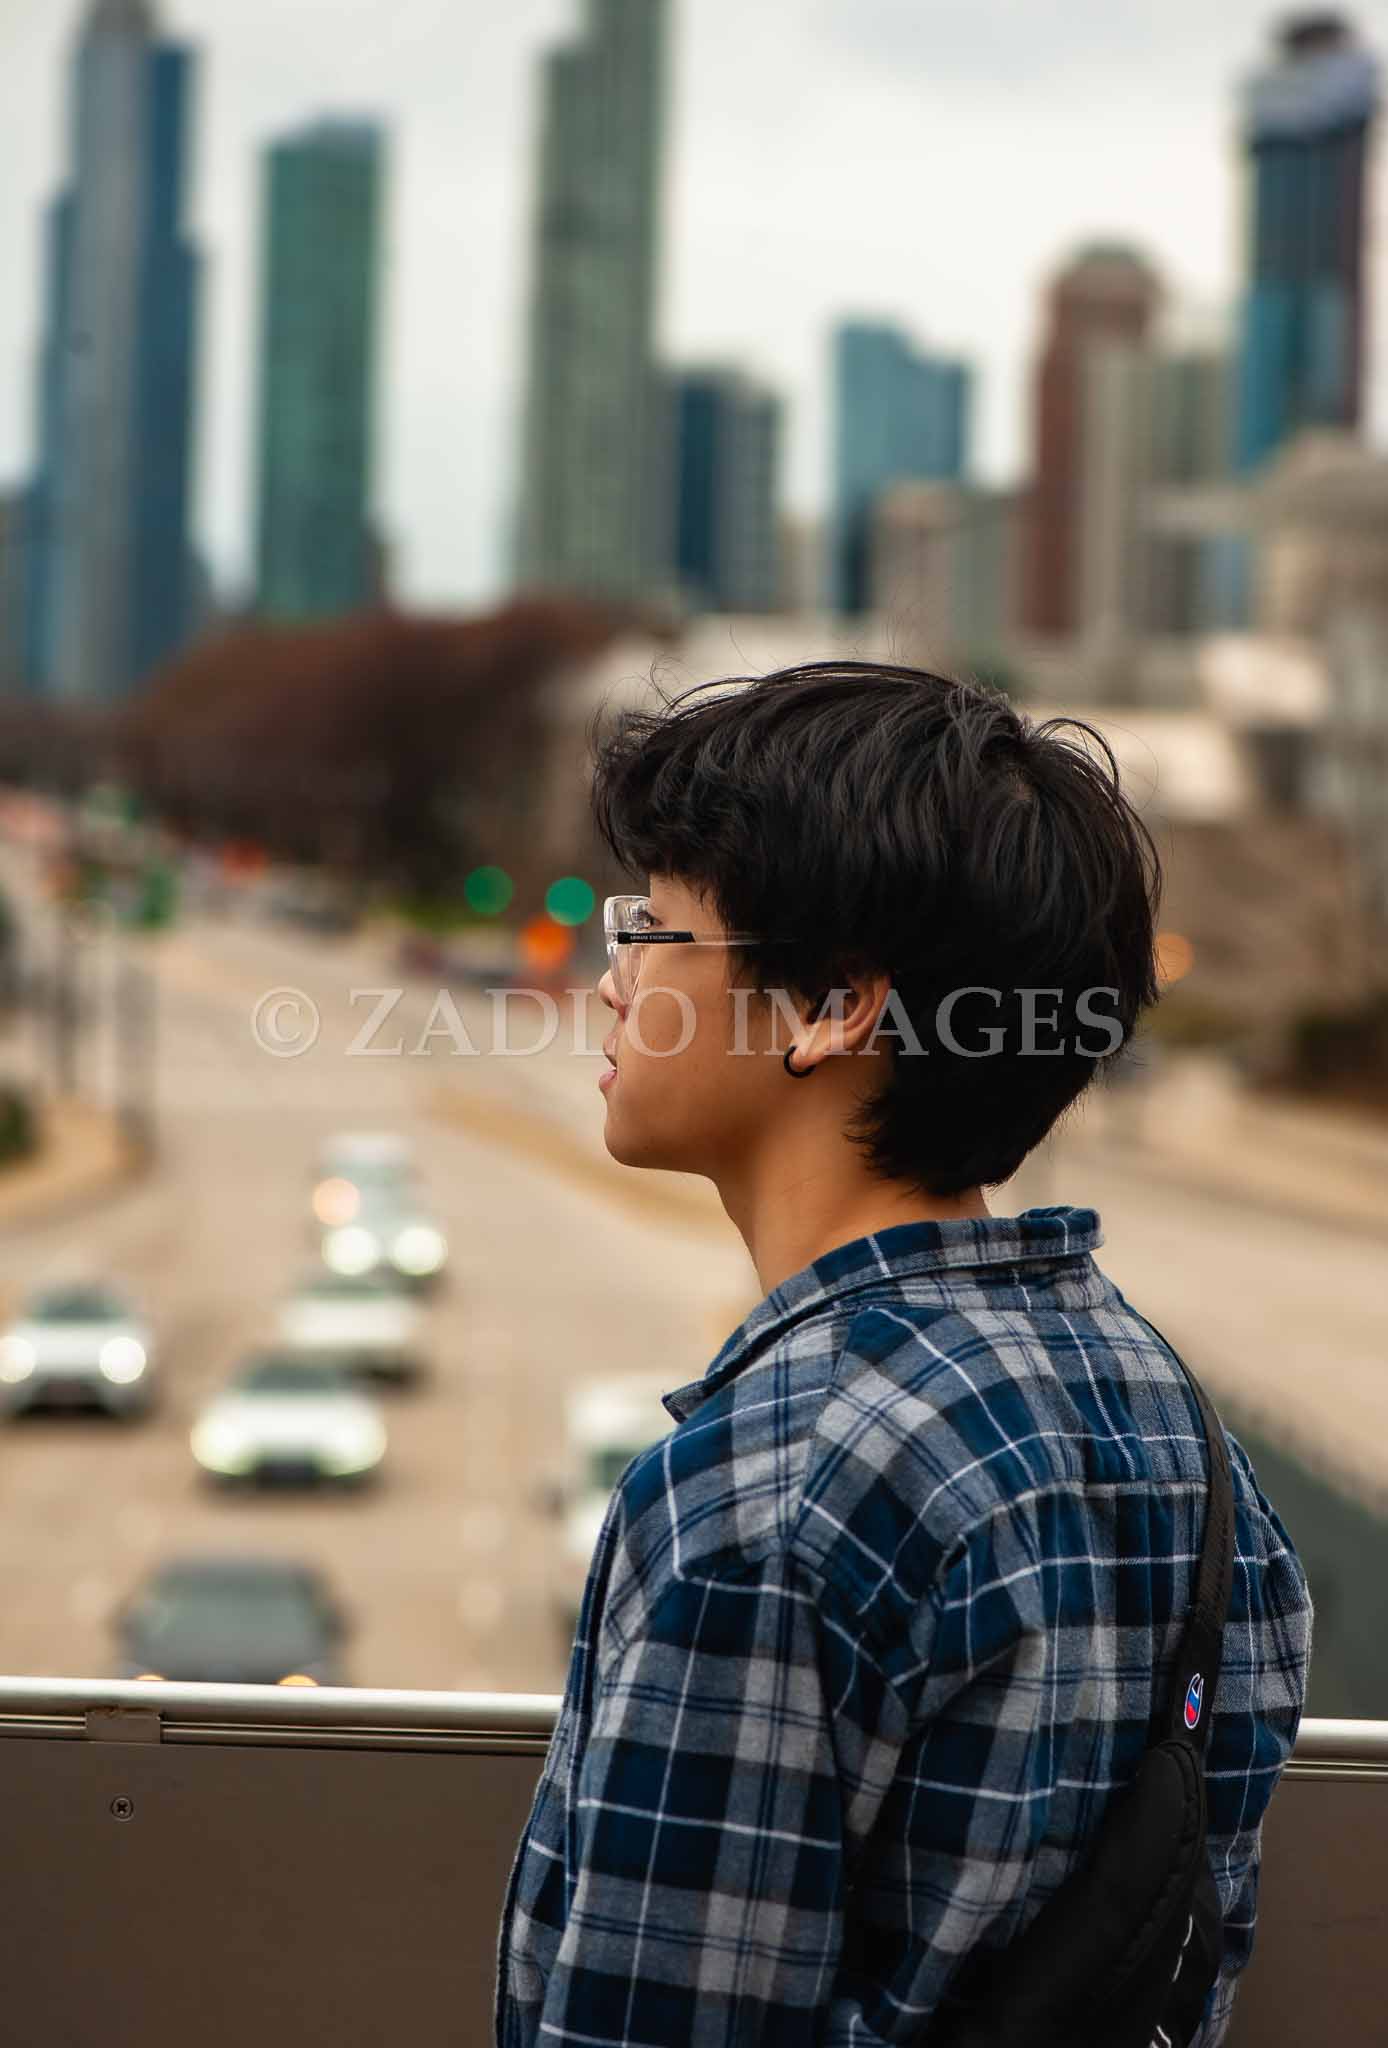 Teen boy looking at cars and skyline.